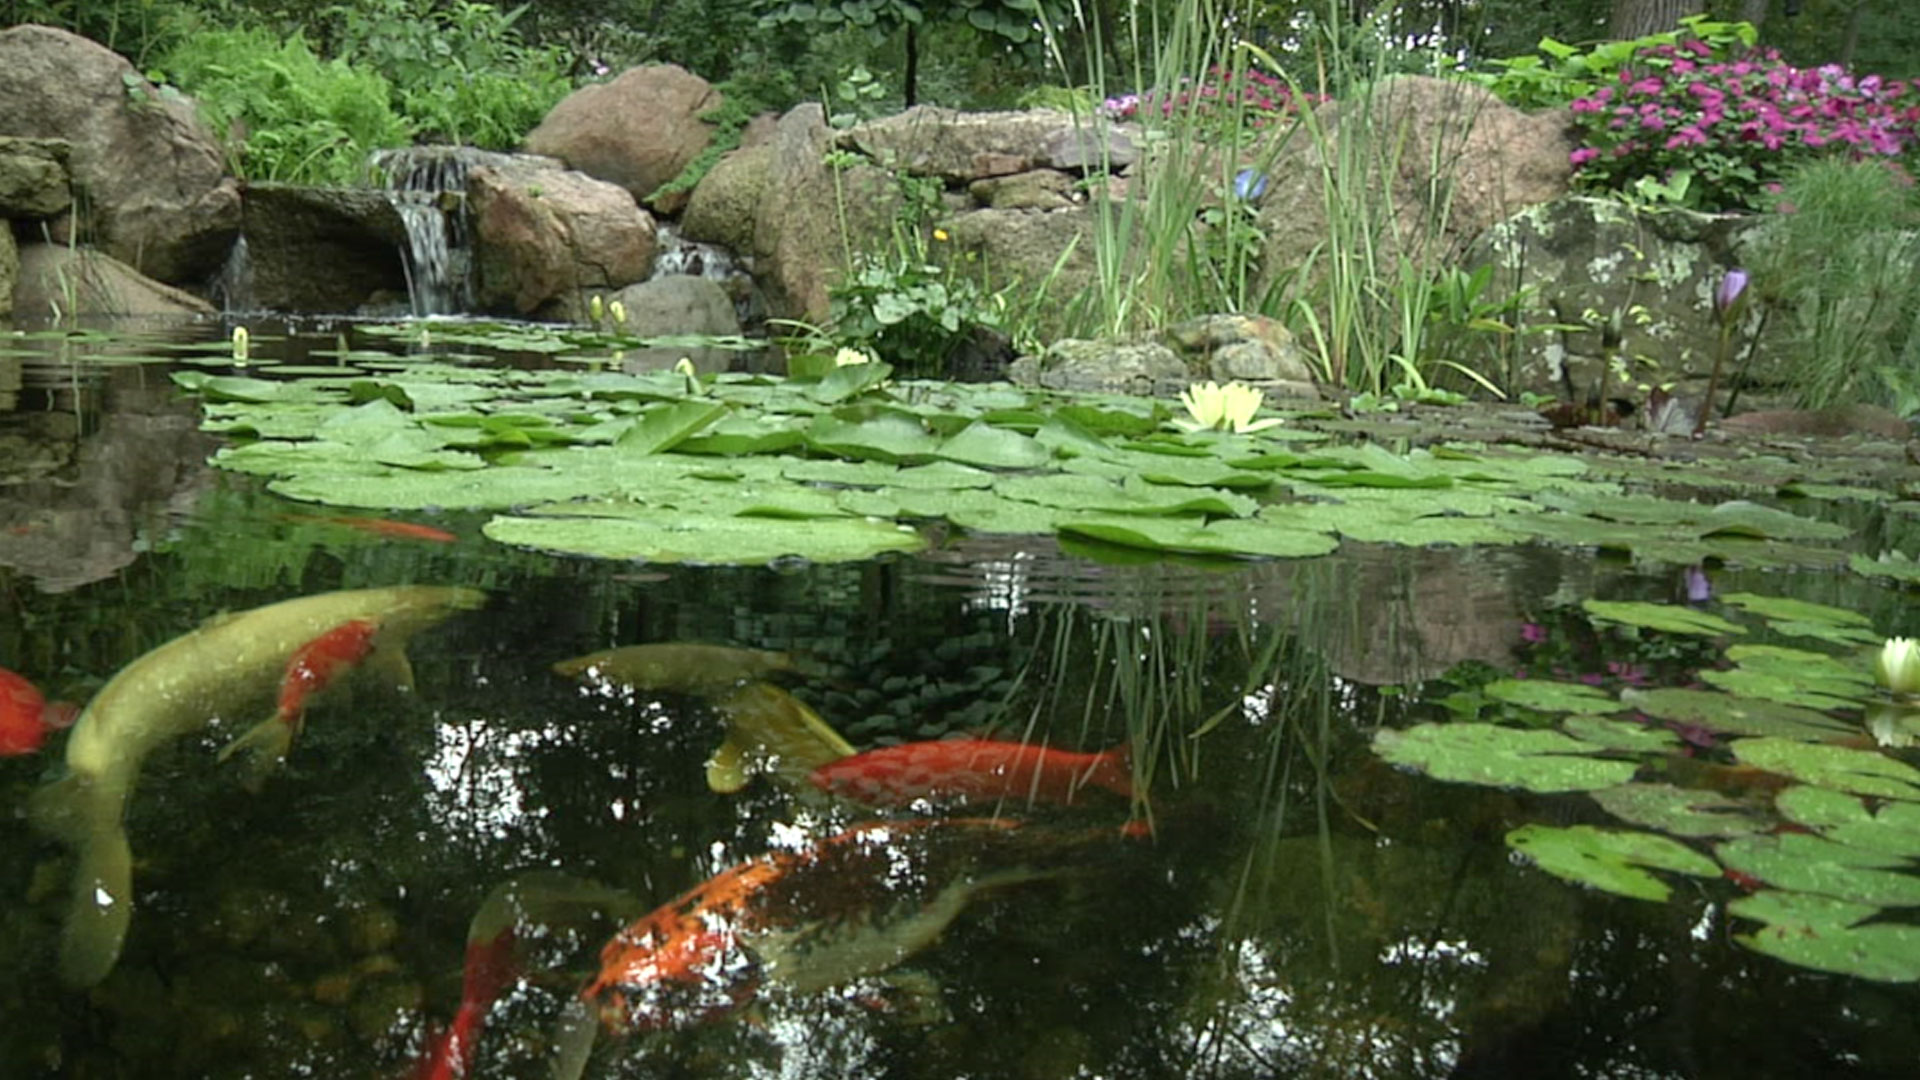 Coolest Recreation Pond With Koi Greg Wittstock The Pond Guy Youtube